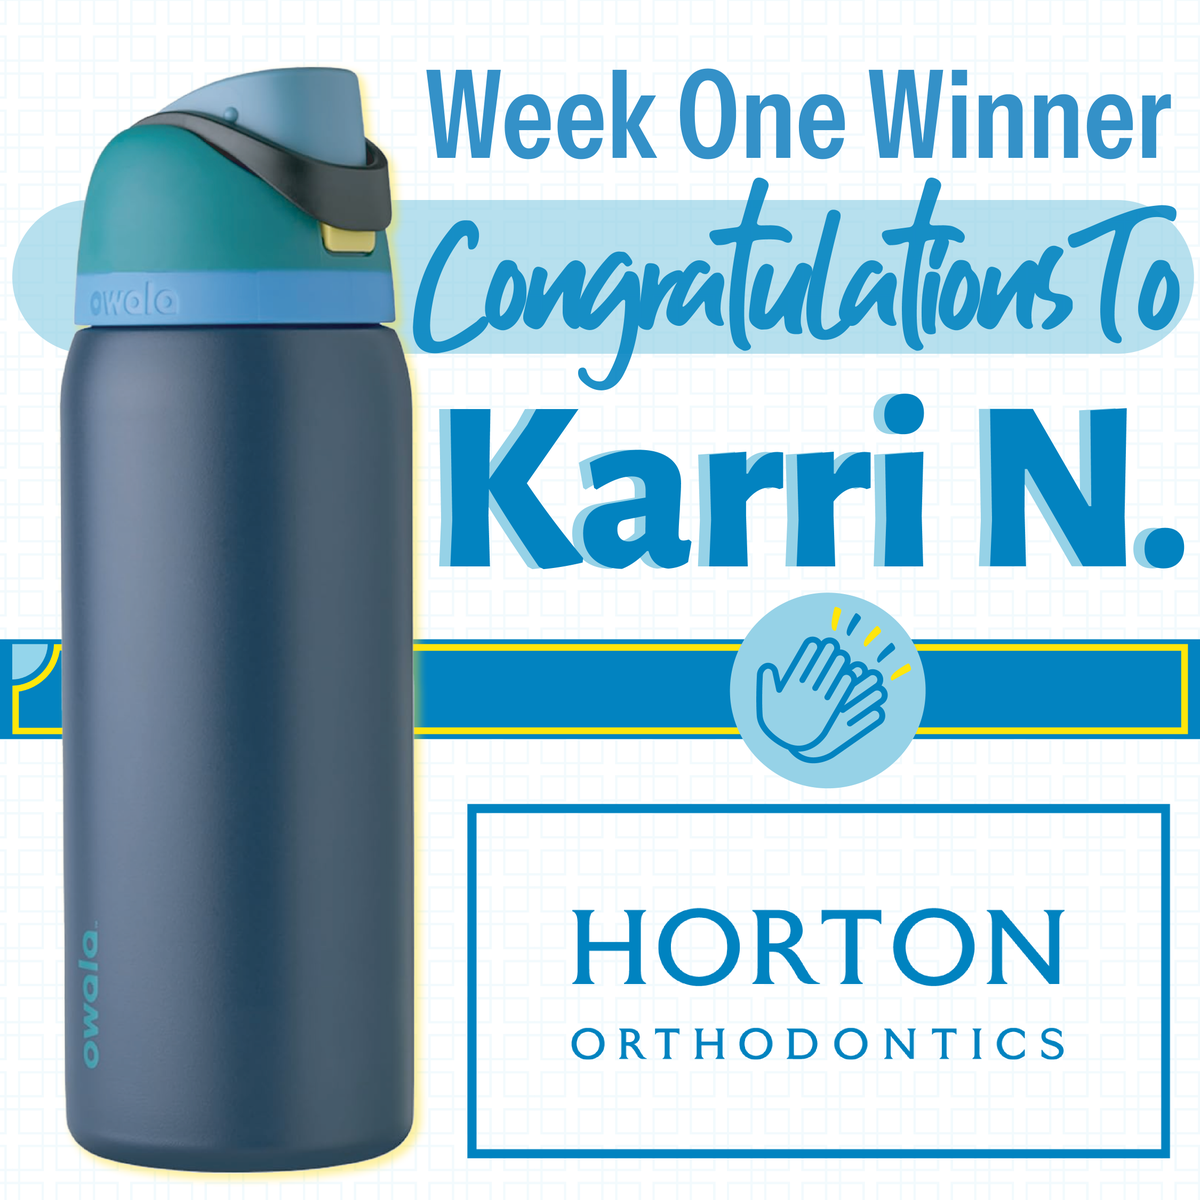 Congratulations to our week one winner, Karri N.! 👏 We hope you enjoy your new Owala Water Bottle! 💧 Stay hydrated in style this spring! 🤩

#Winner #Congratulations #Contest #Orthodontist #WoodburyMN